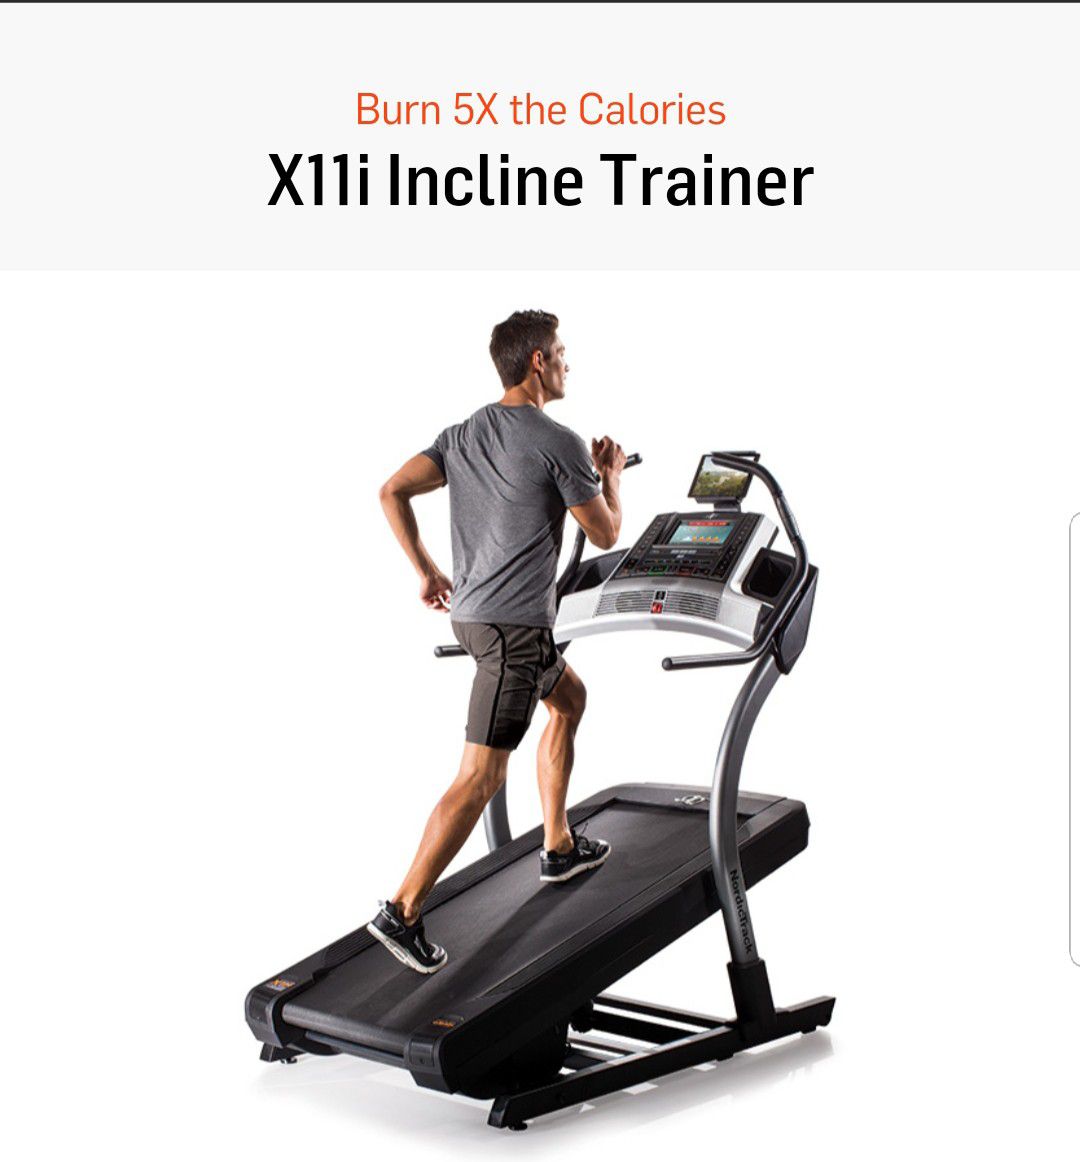 BRAND NEW NORDICTRACK X11i INCLINE TRAINER